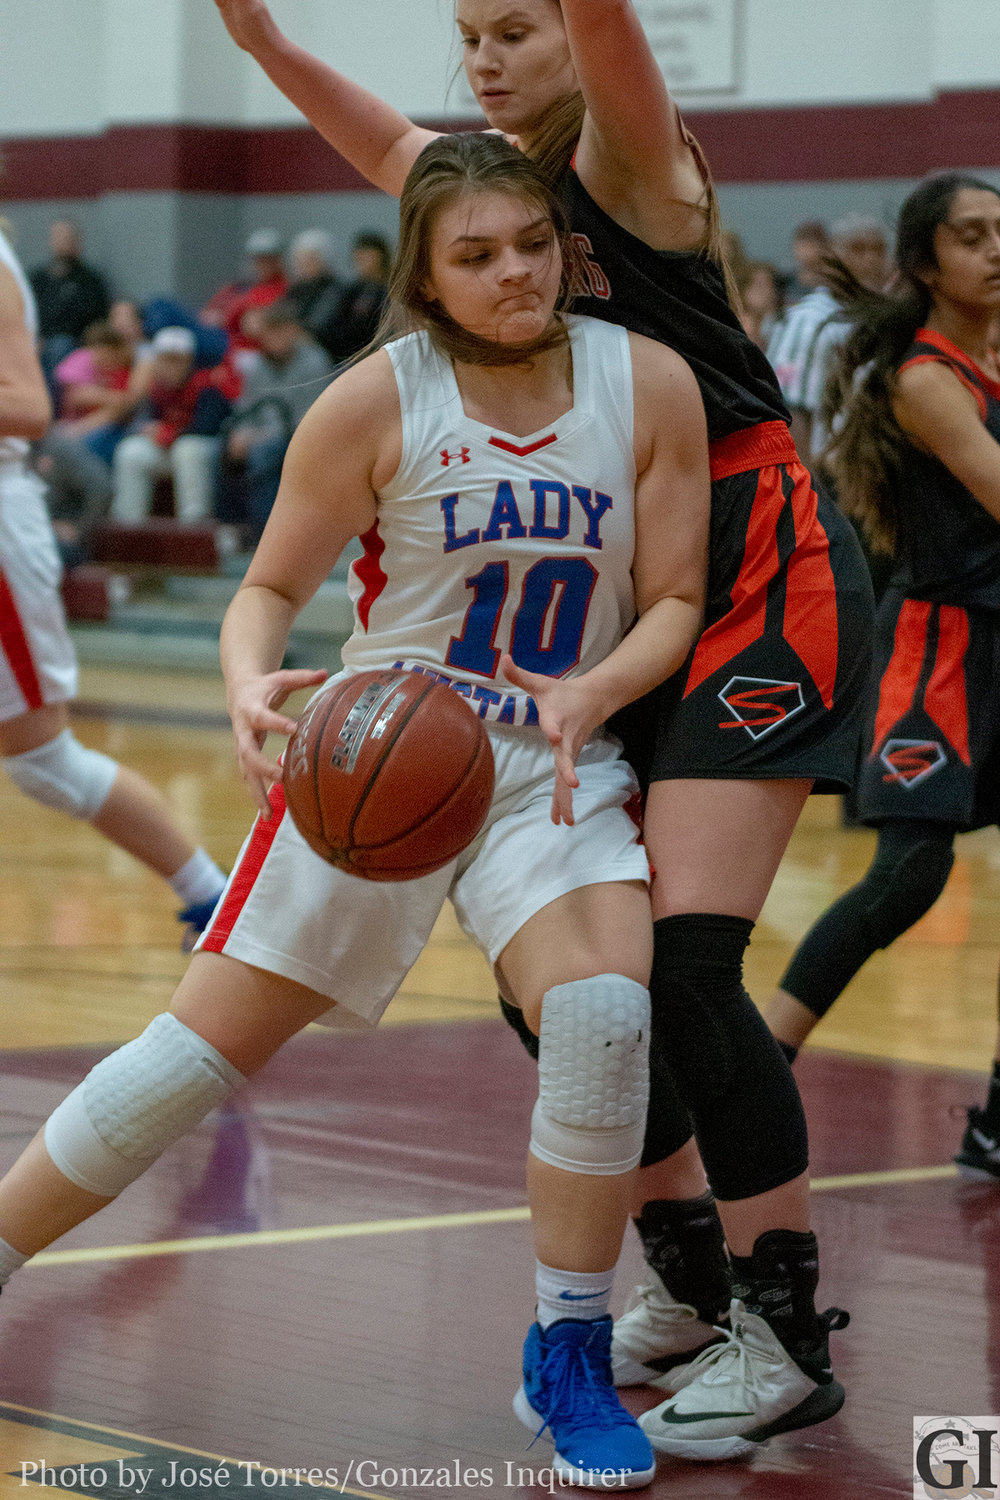 Katie Tschoepe (10) is covered down low in Nixon-Smiley’s 58-30 loss against Schulenburg. Tschoepe led scoring with 12 points.